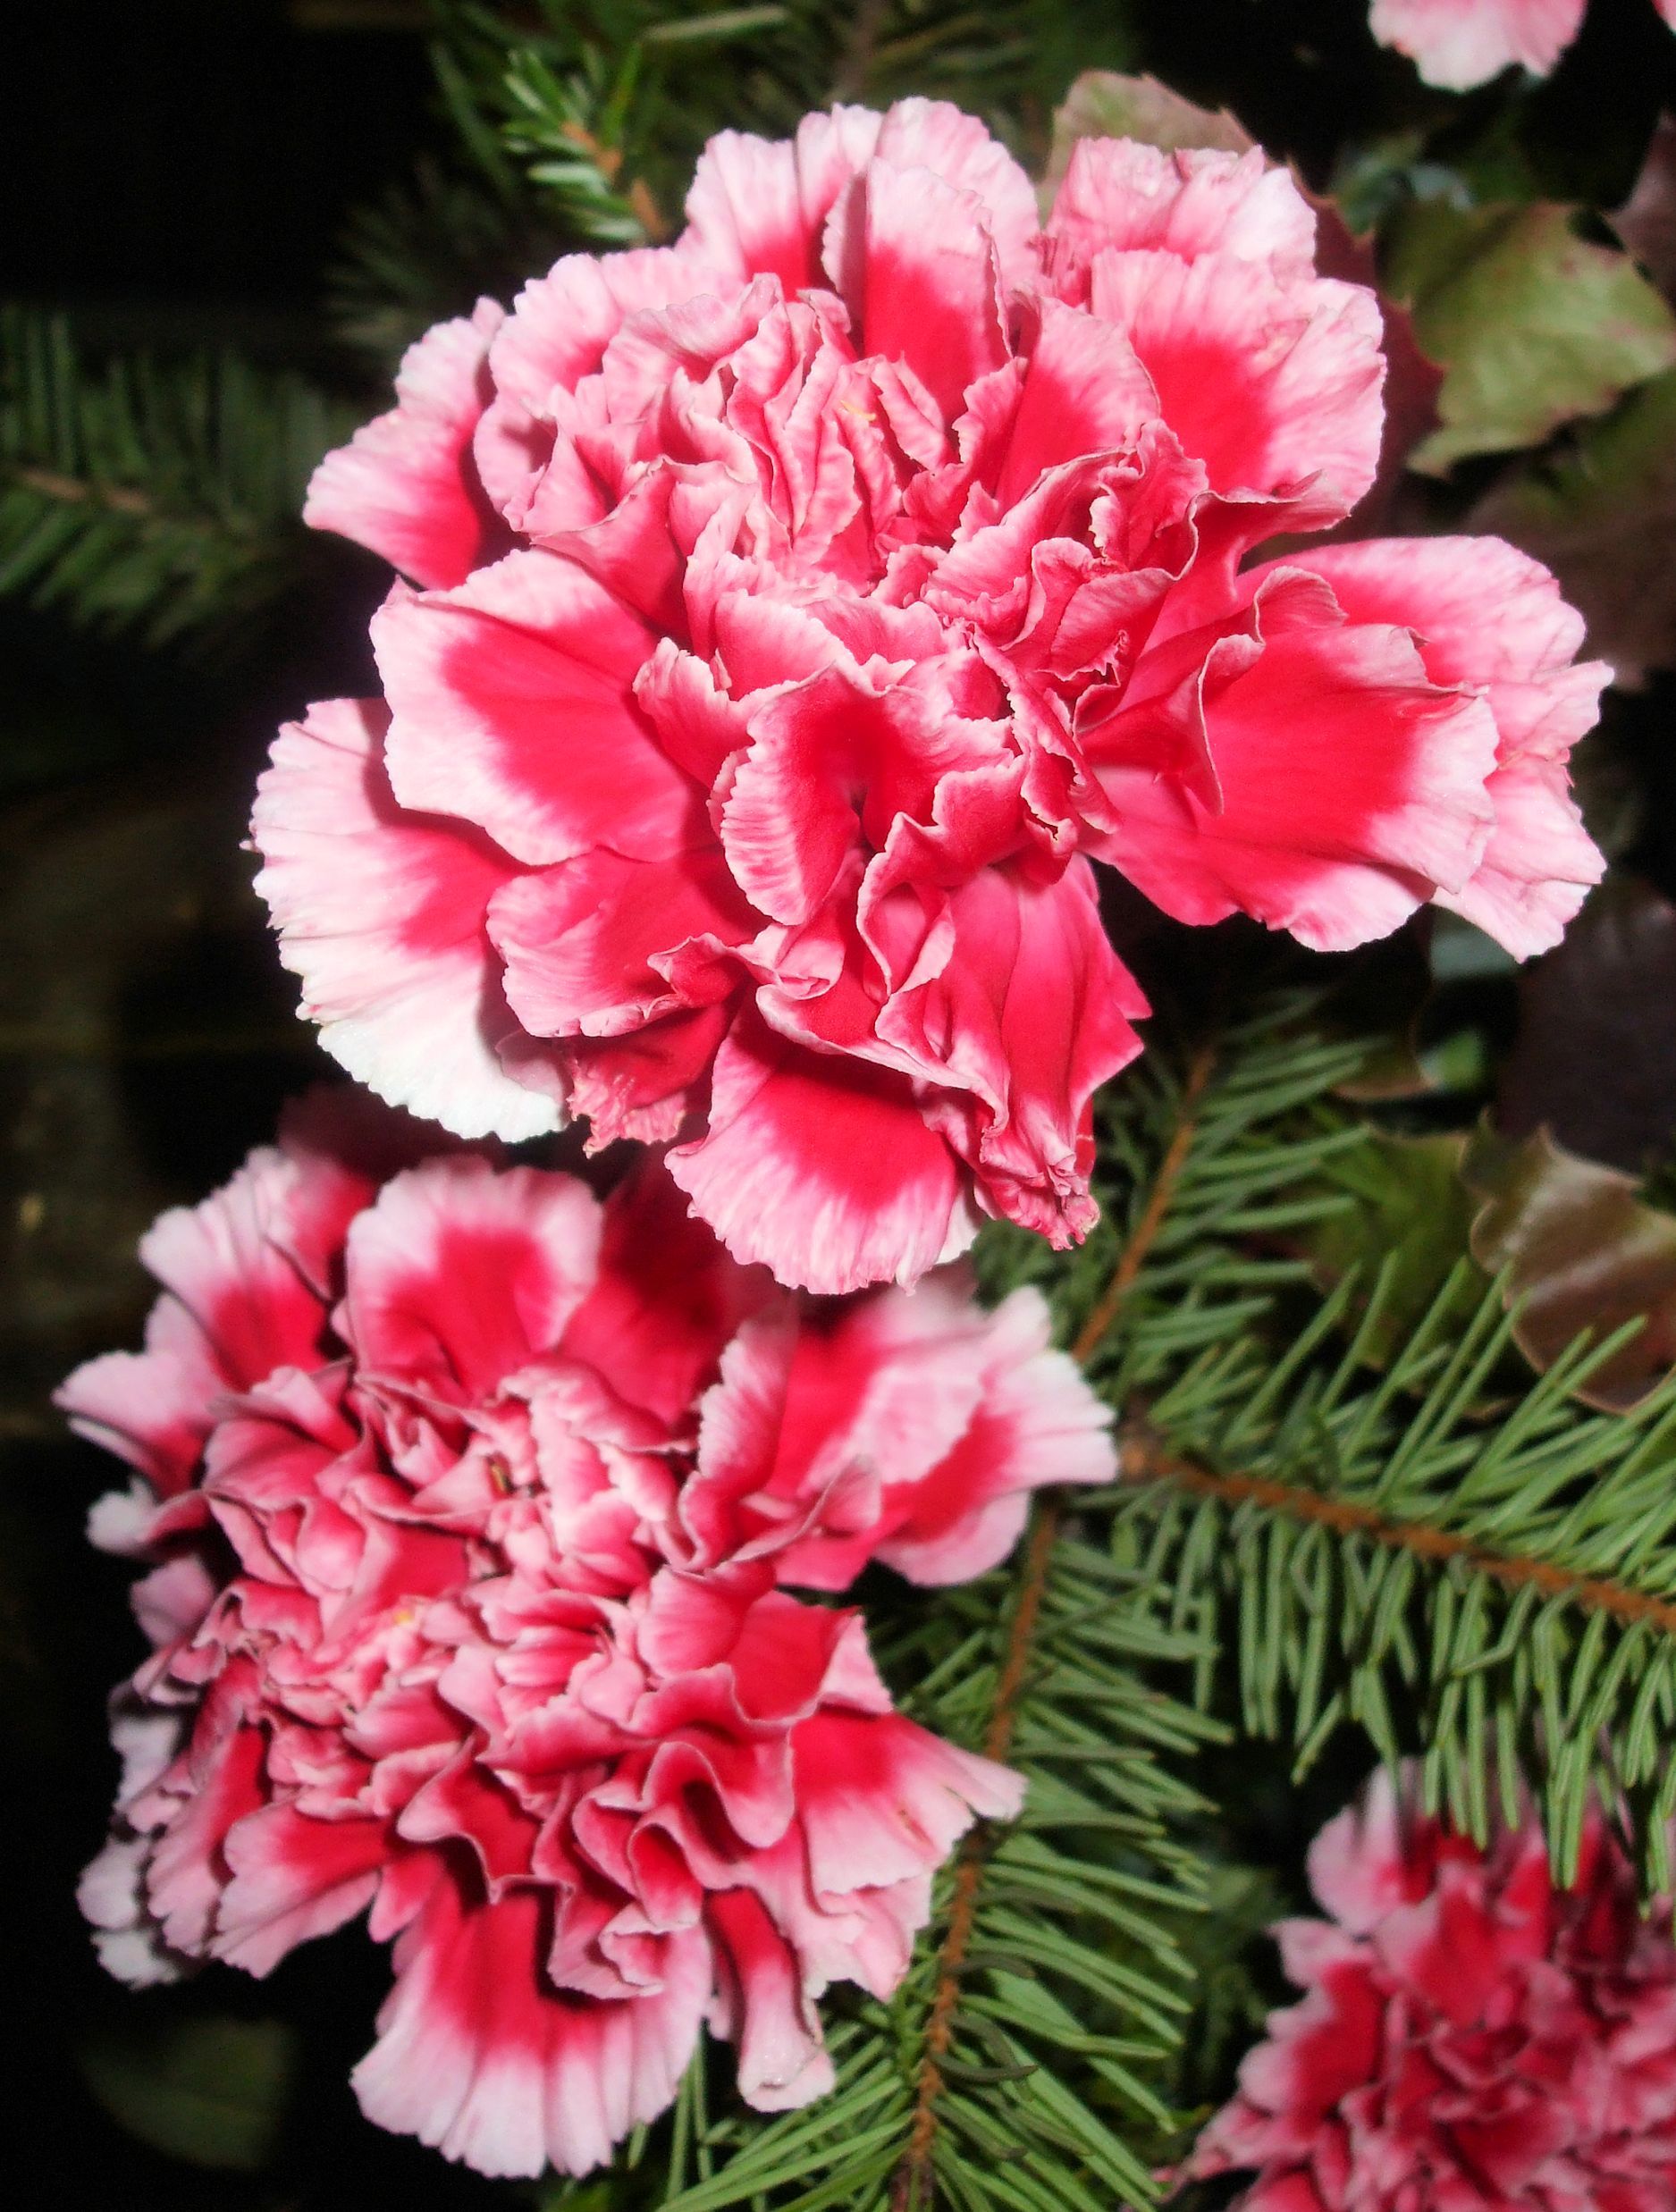 Carnation 4: close-up of two carnations, with white-edged frilly ...